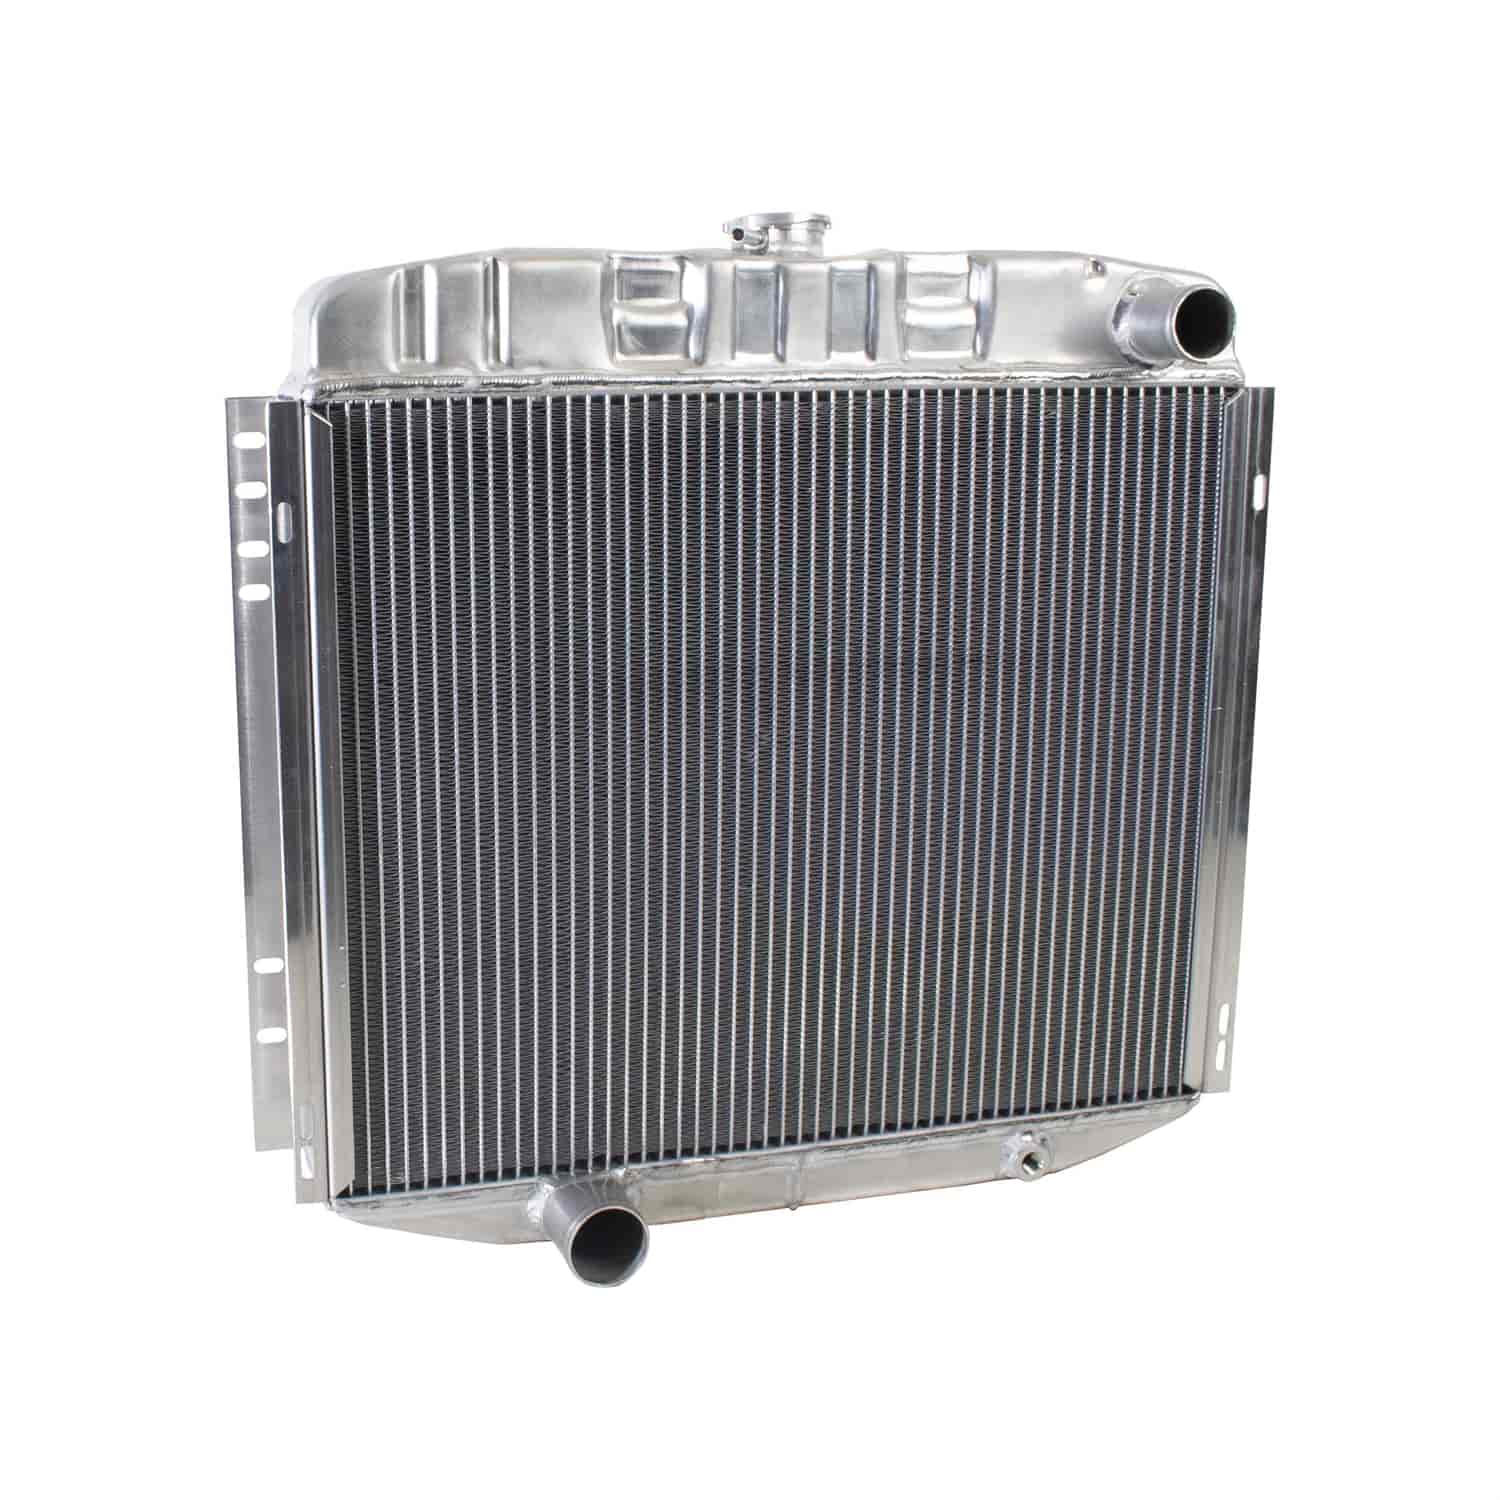 ExactFit Radiator for 1967-1970 Ford Mustang/Mercury Cougar with Late Small Block & L6